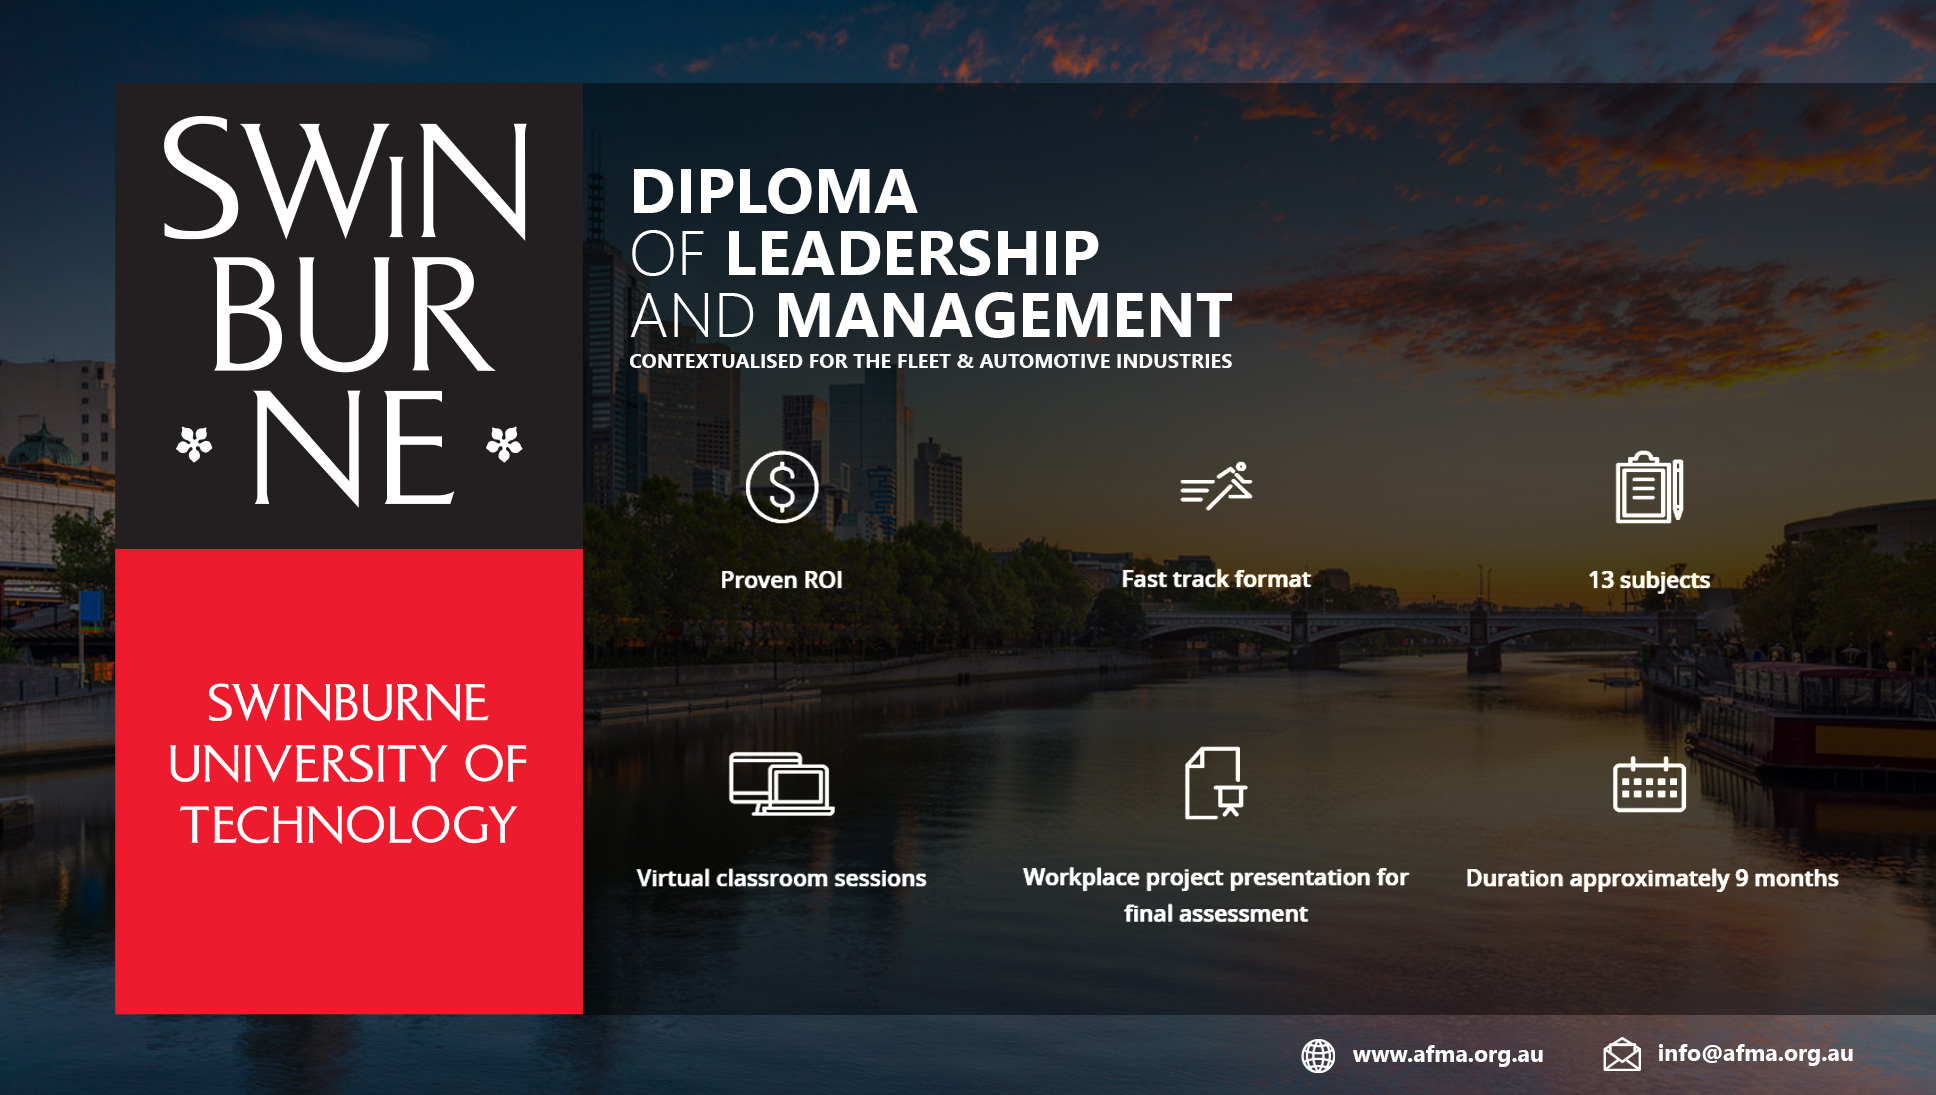 Applications Open for the 2023 Diploma of Leadership and Management